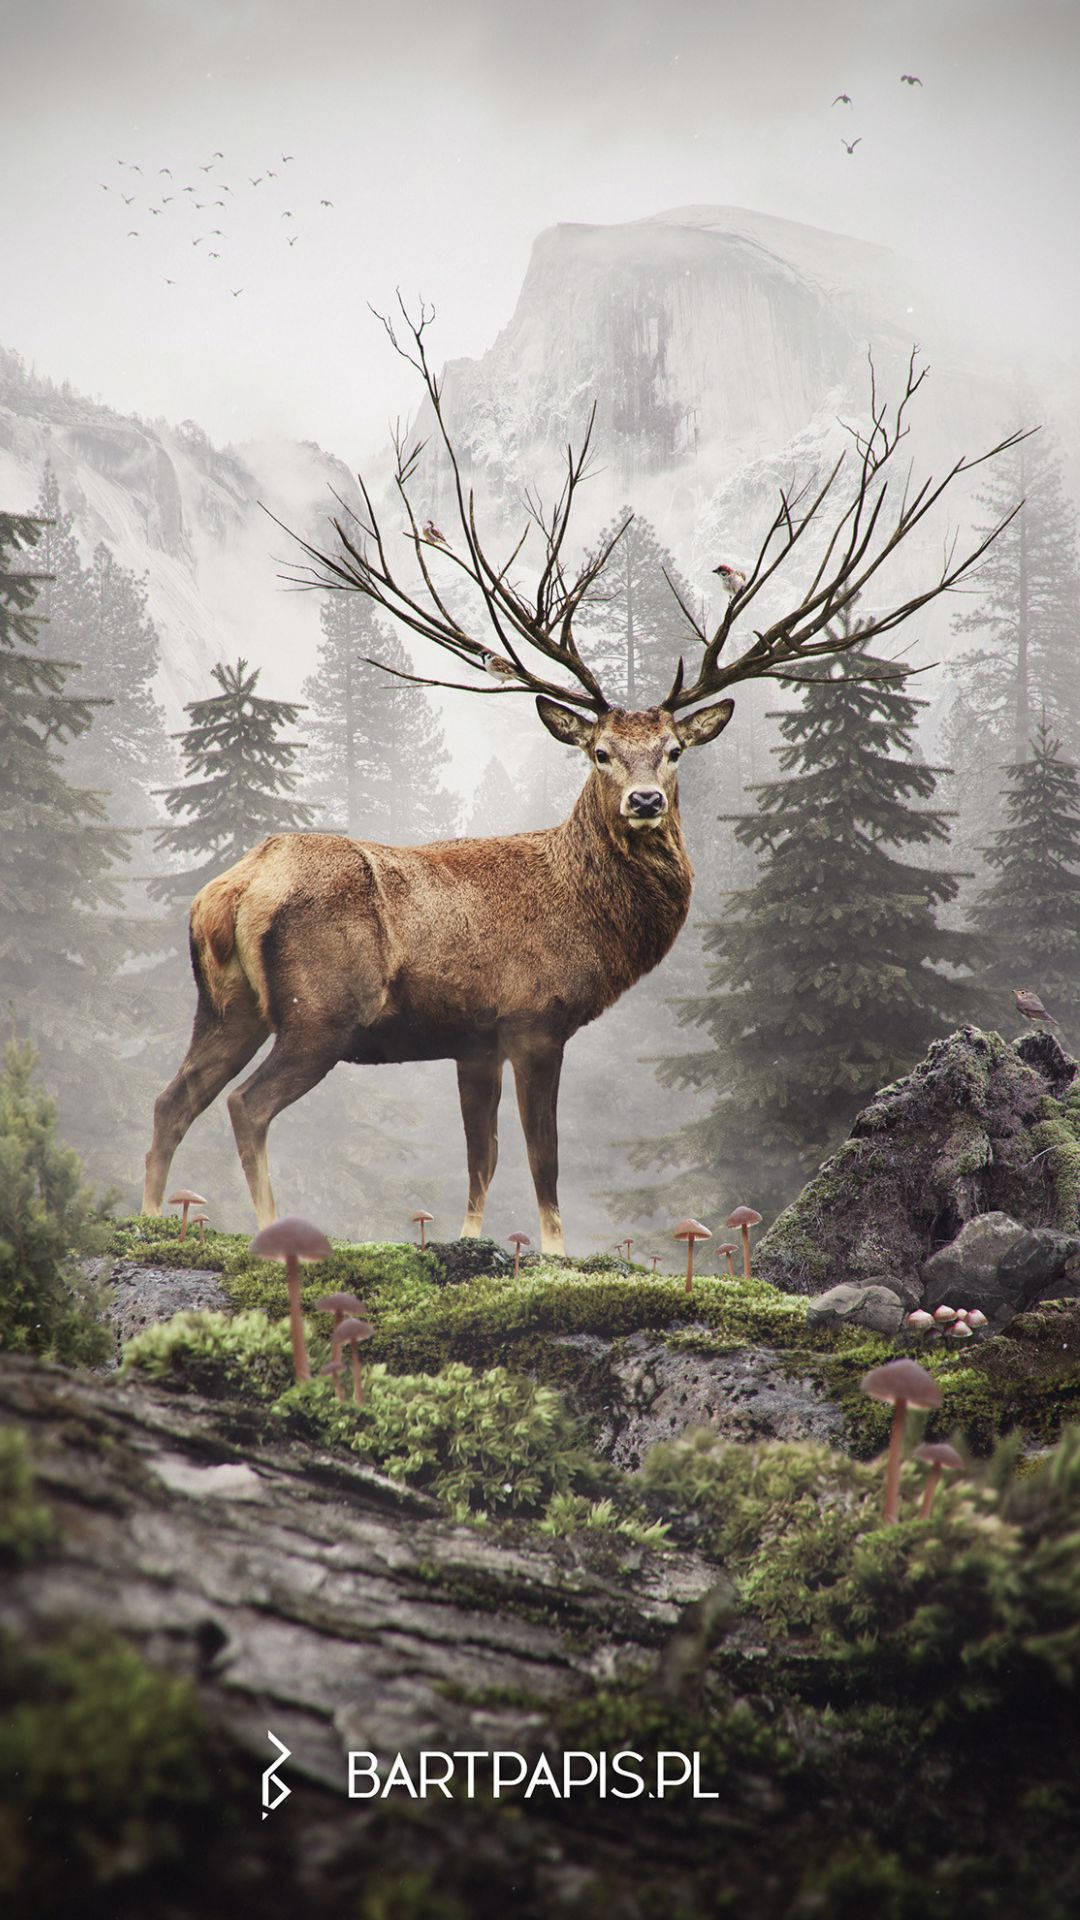 Majestic Deer in a Forest Setting Wallpaper